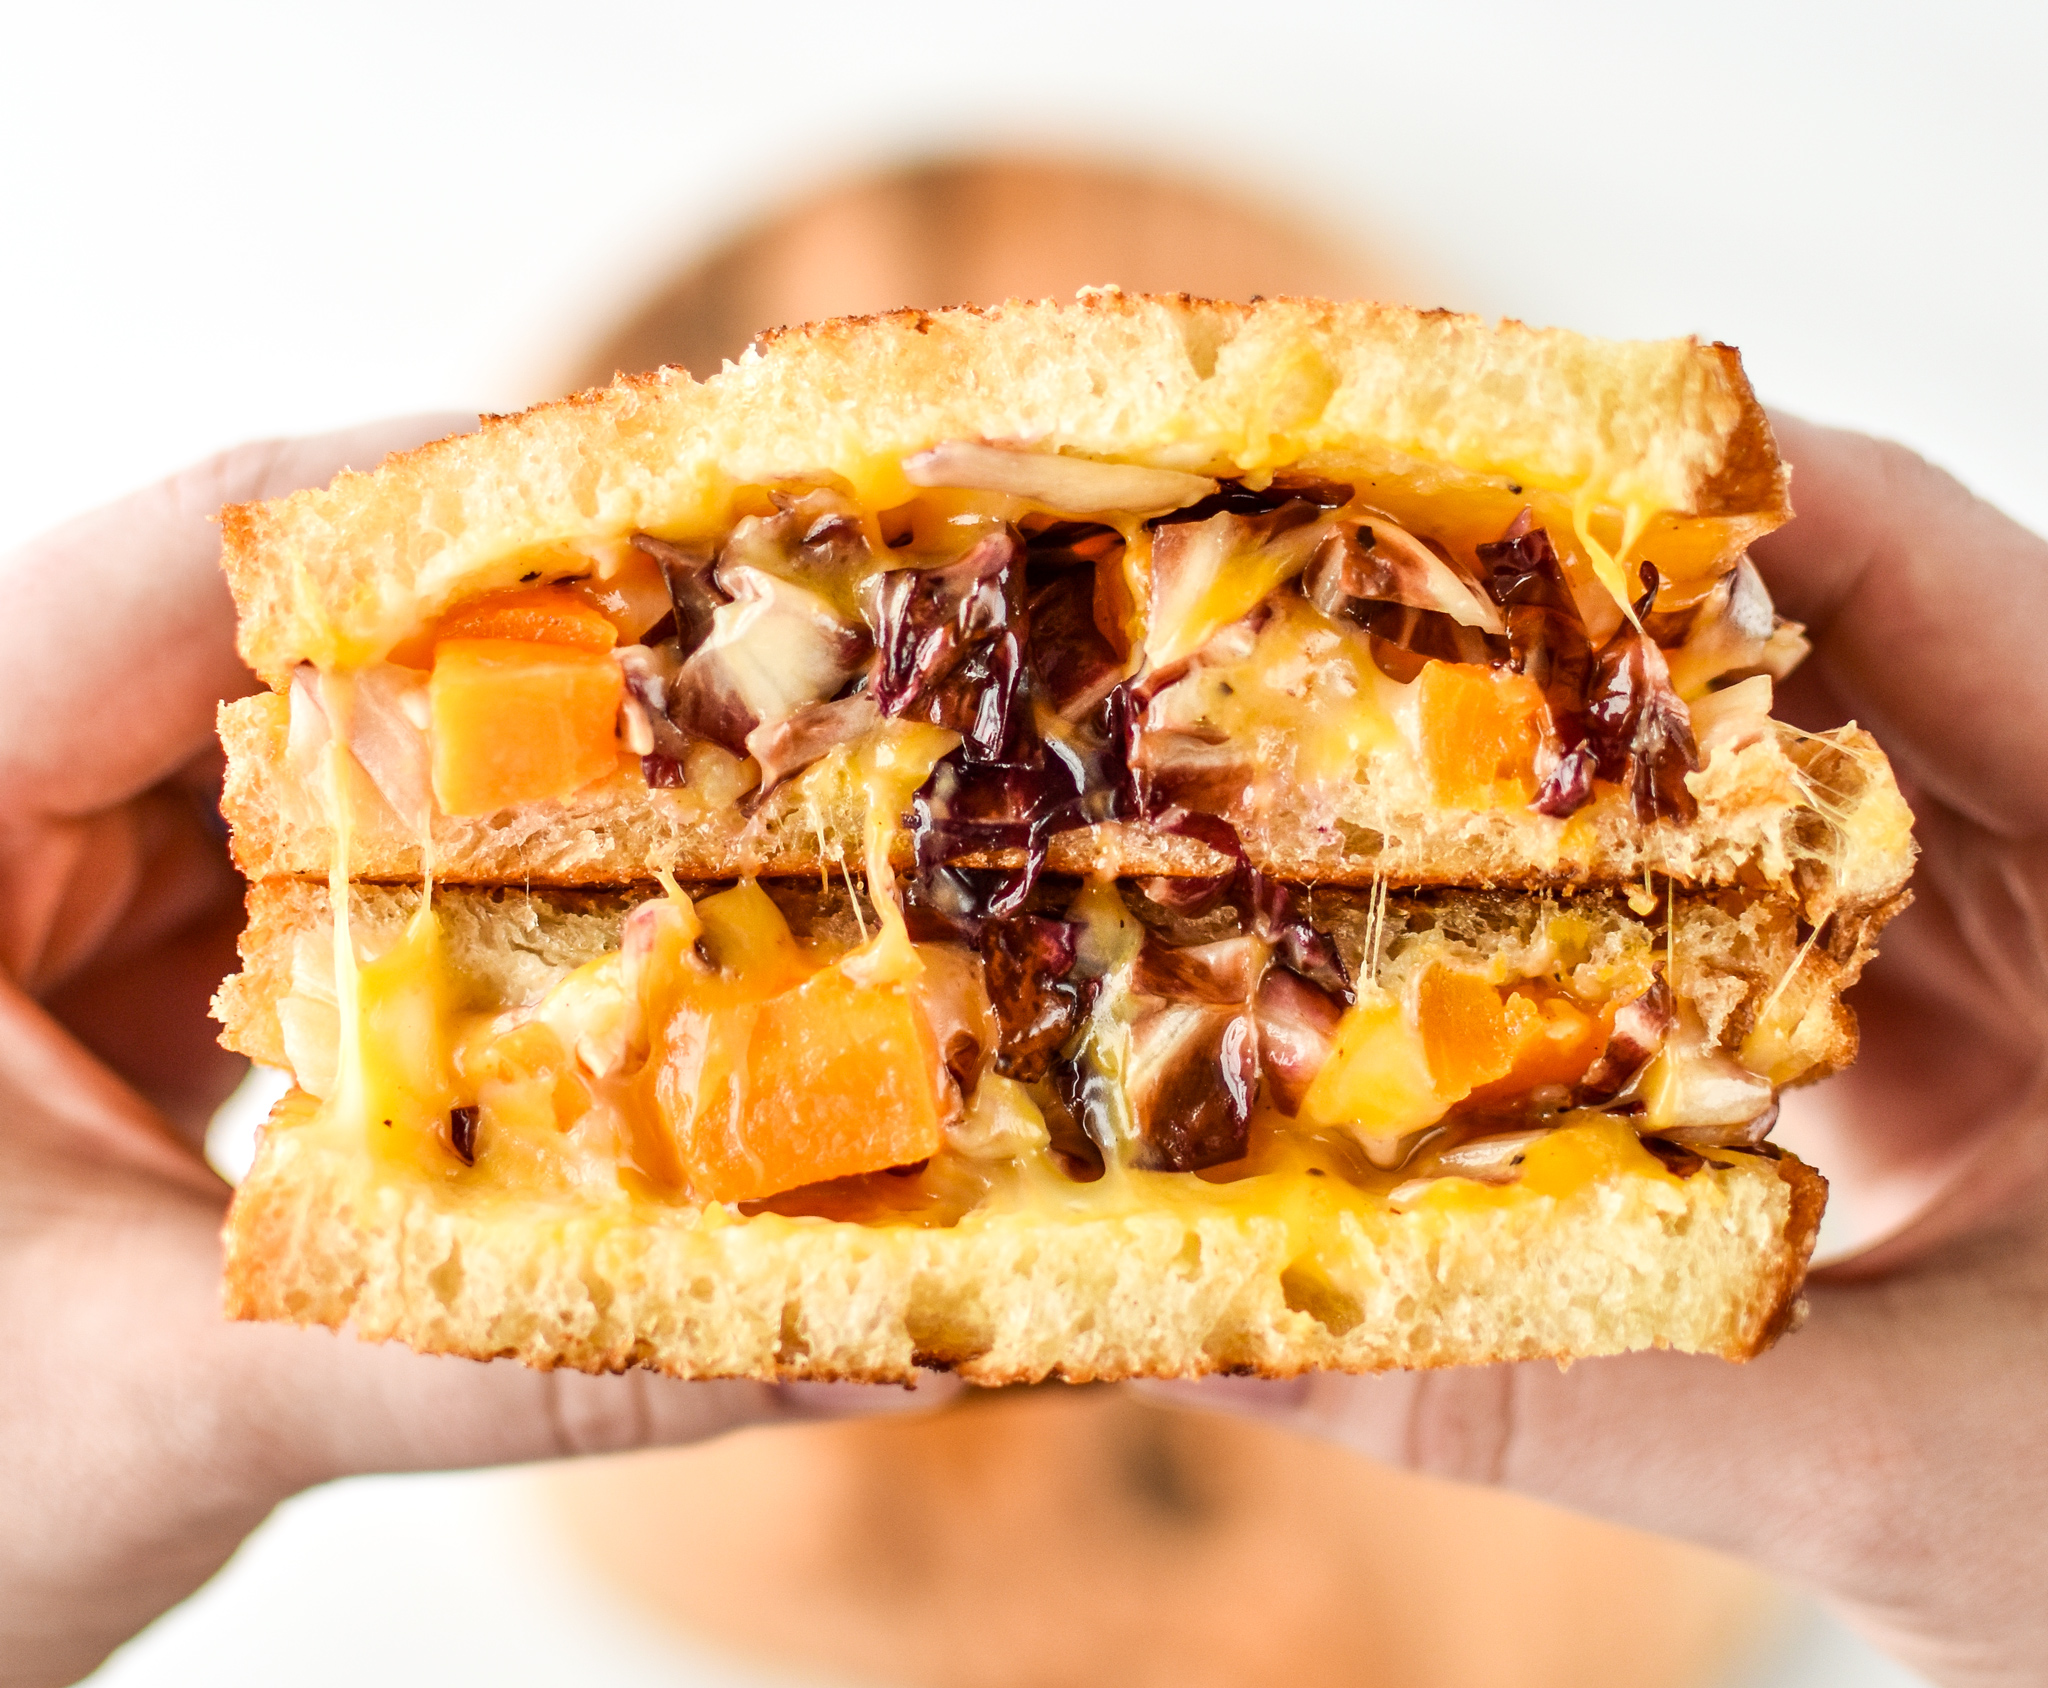 Holding a roasted squash salad grilled cheese sandwich